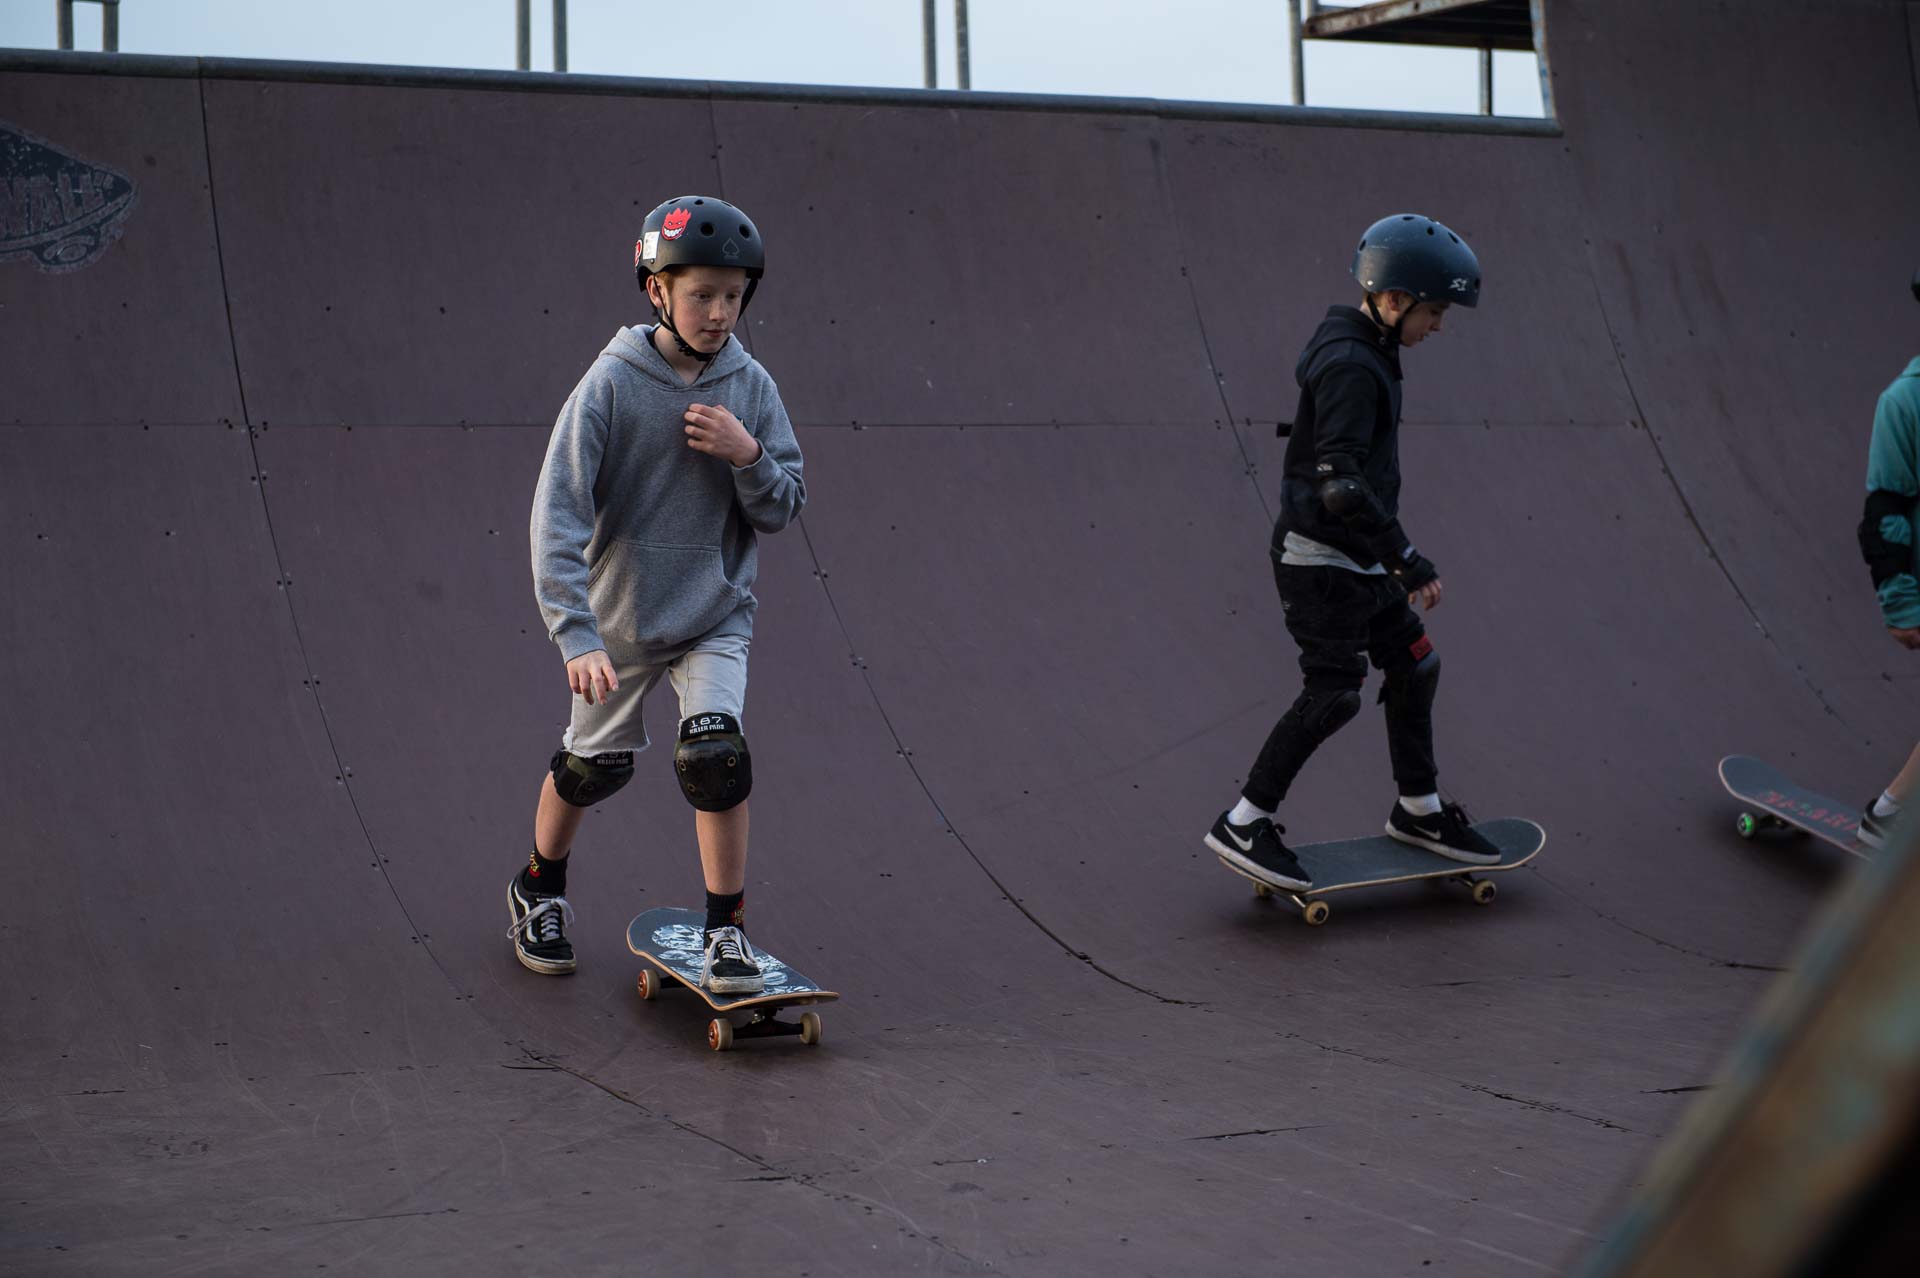 Skate students in a lesson on our outdoor halfpipe at Rampfest Indoor Skatepark